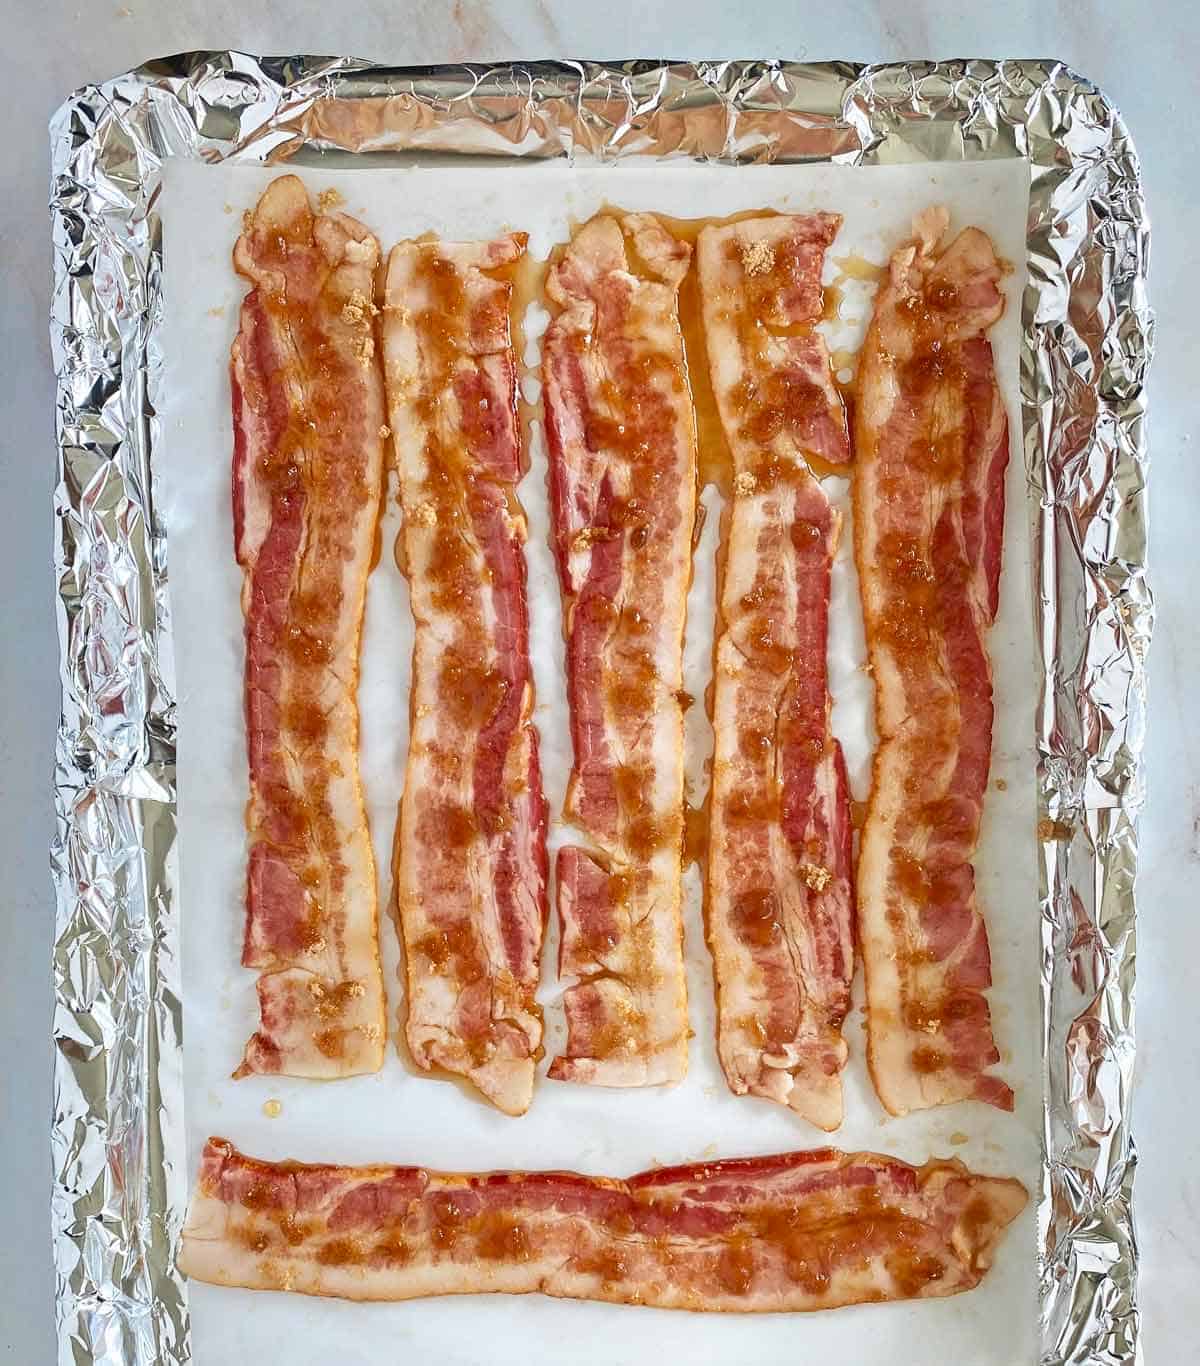 6 strips of uncooked bacon coated with maple syrup and brown sugar on a foil lined baking sheet.